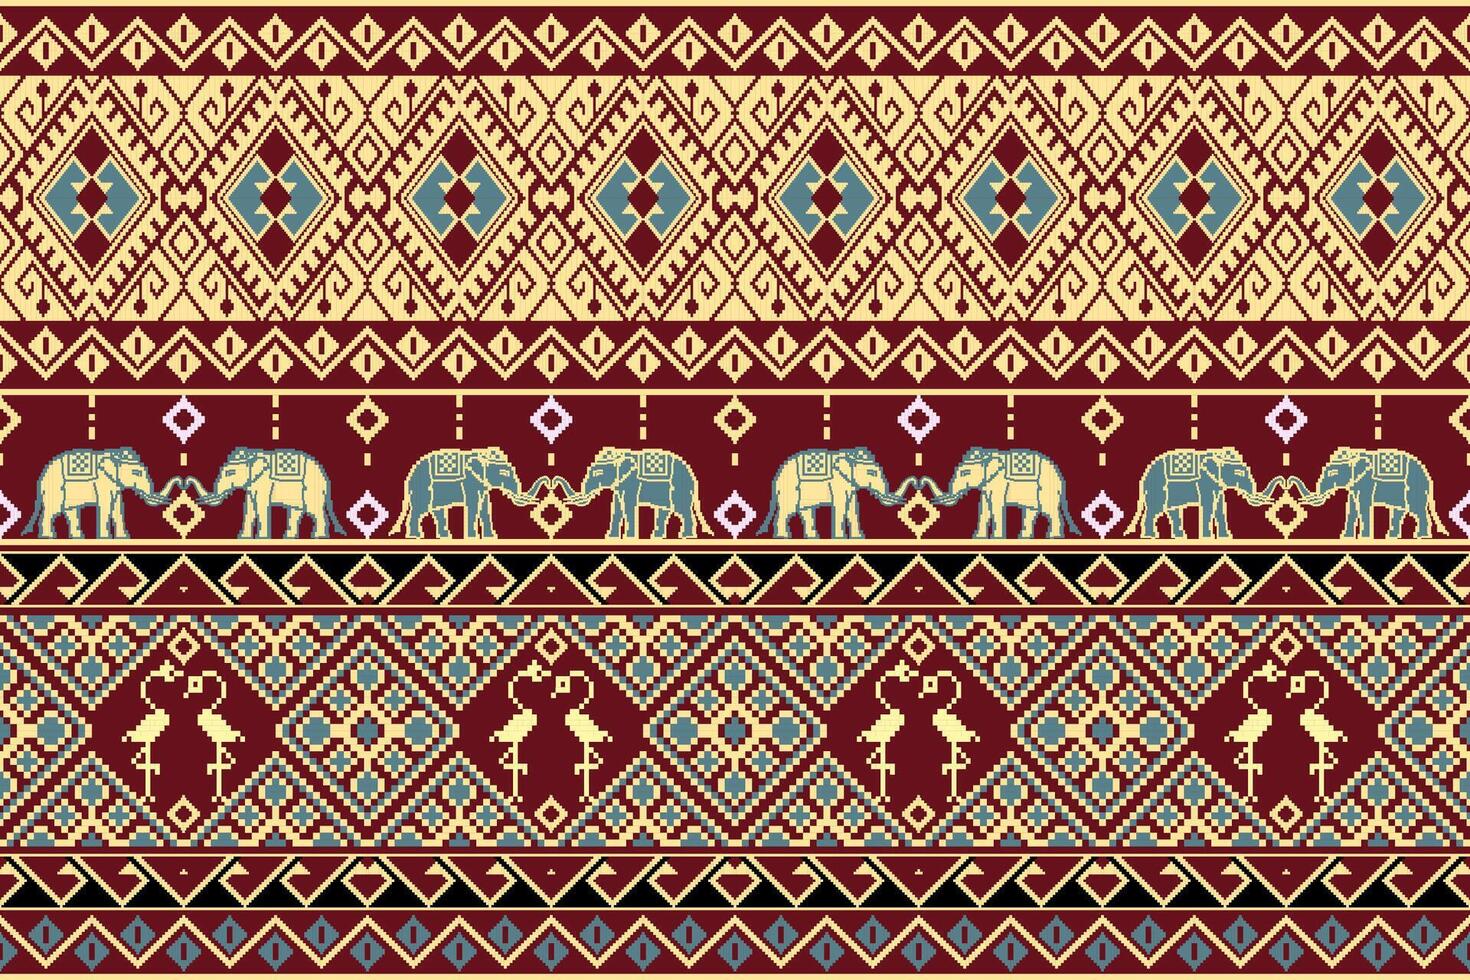 Traditional Thai Ethnic Seamless Pattern with Elephants and Birds.  Vector design for fabric, carpet, clothing, embroidery, wallpaper, and background